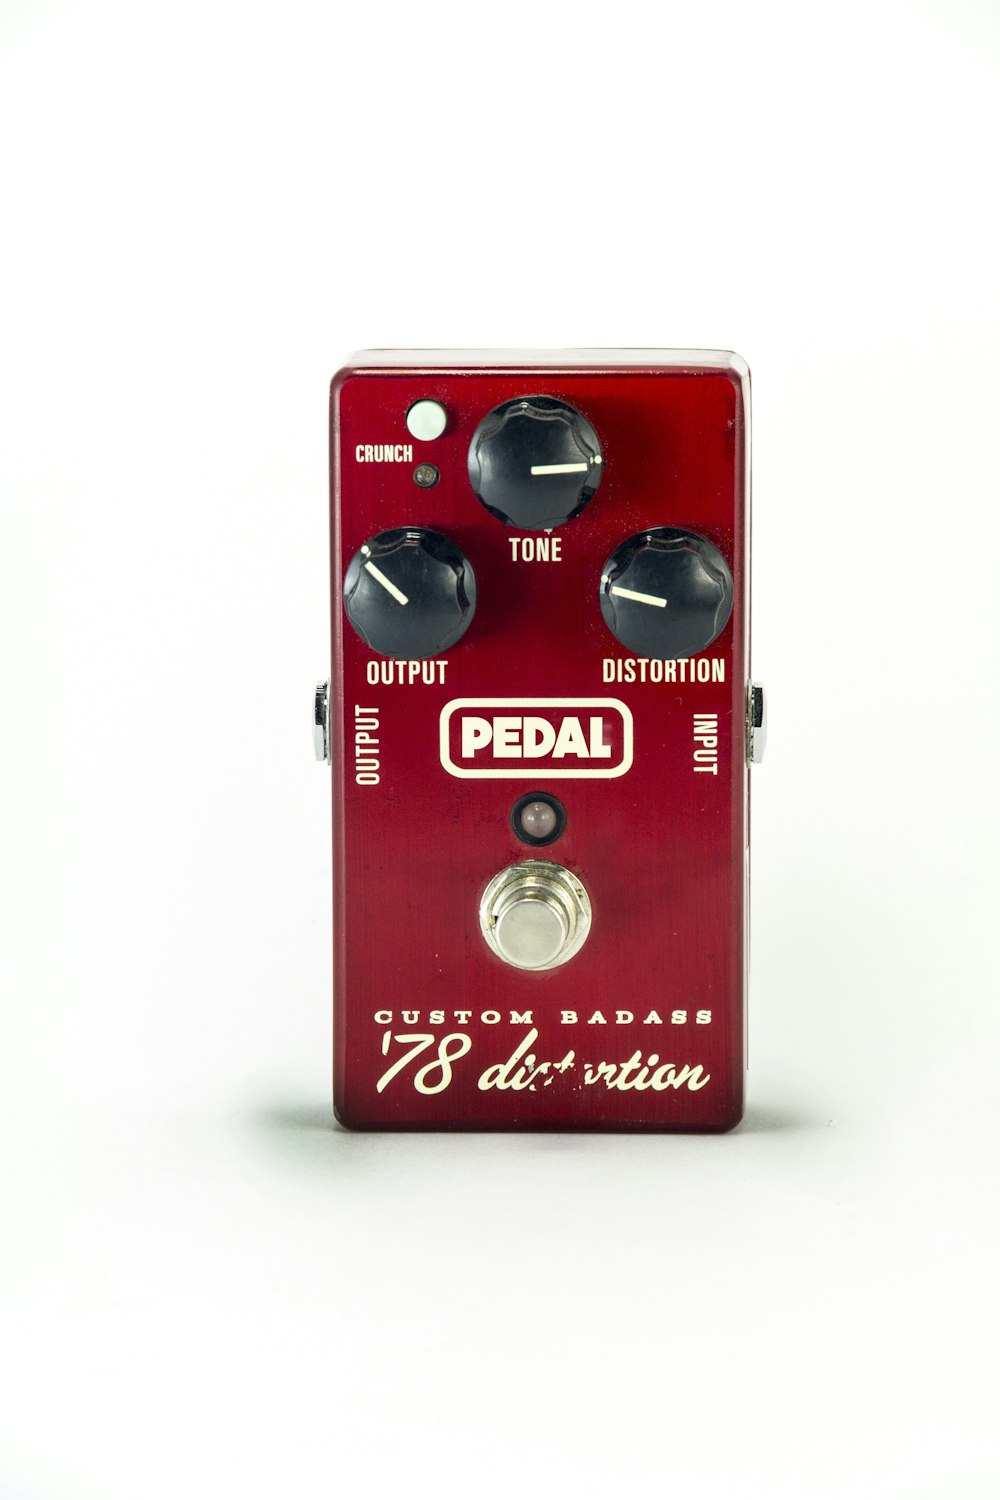 red, white, and black Pedal guitar distortion pedal